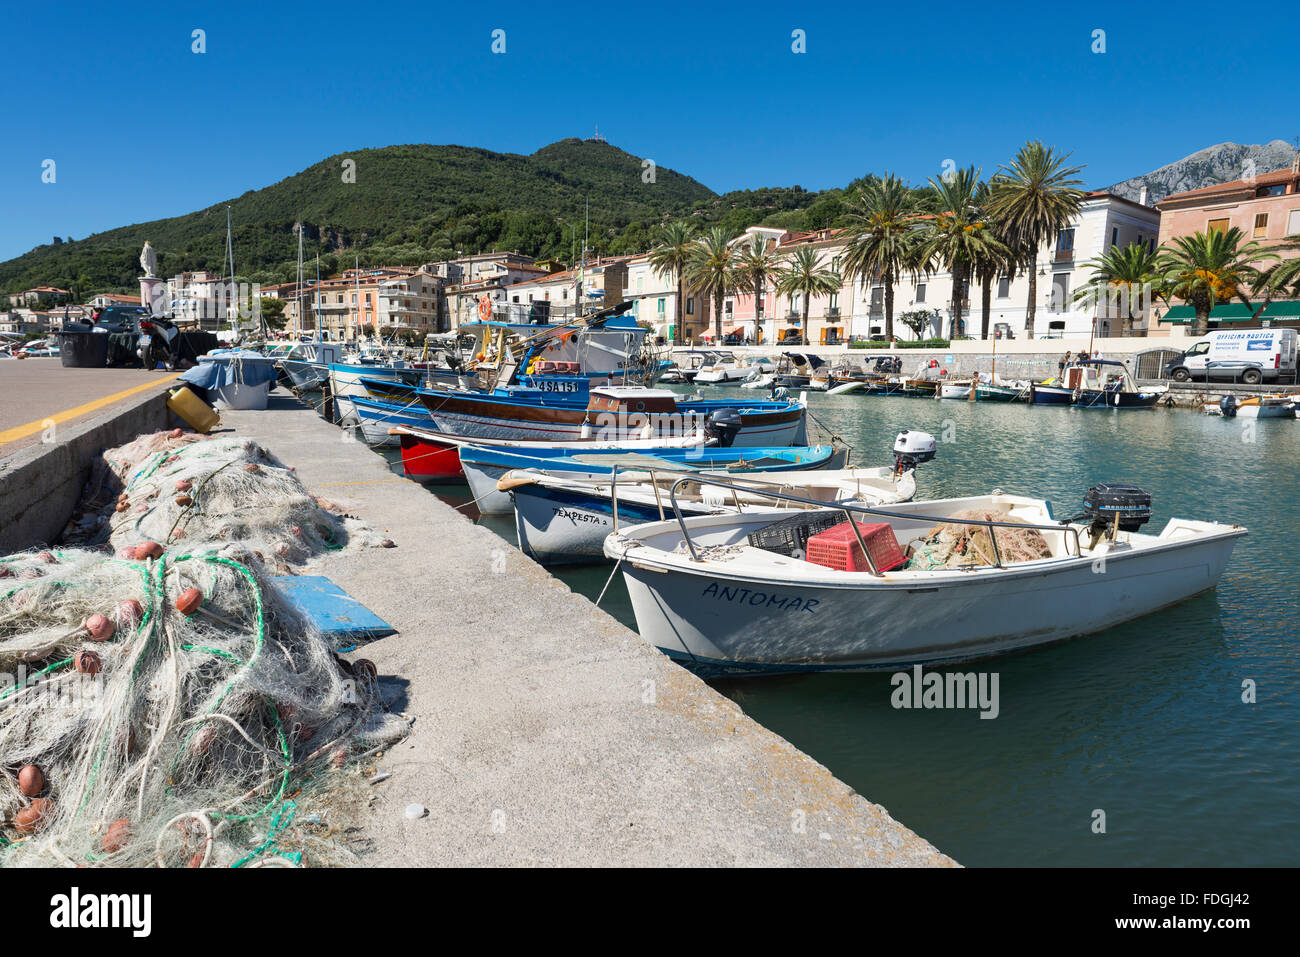 Fishing and motor boats in the picturesque harbor of Scario on the coast of the Mediterranean Sea in Cilento, Campania, Italy Stock Photo